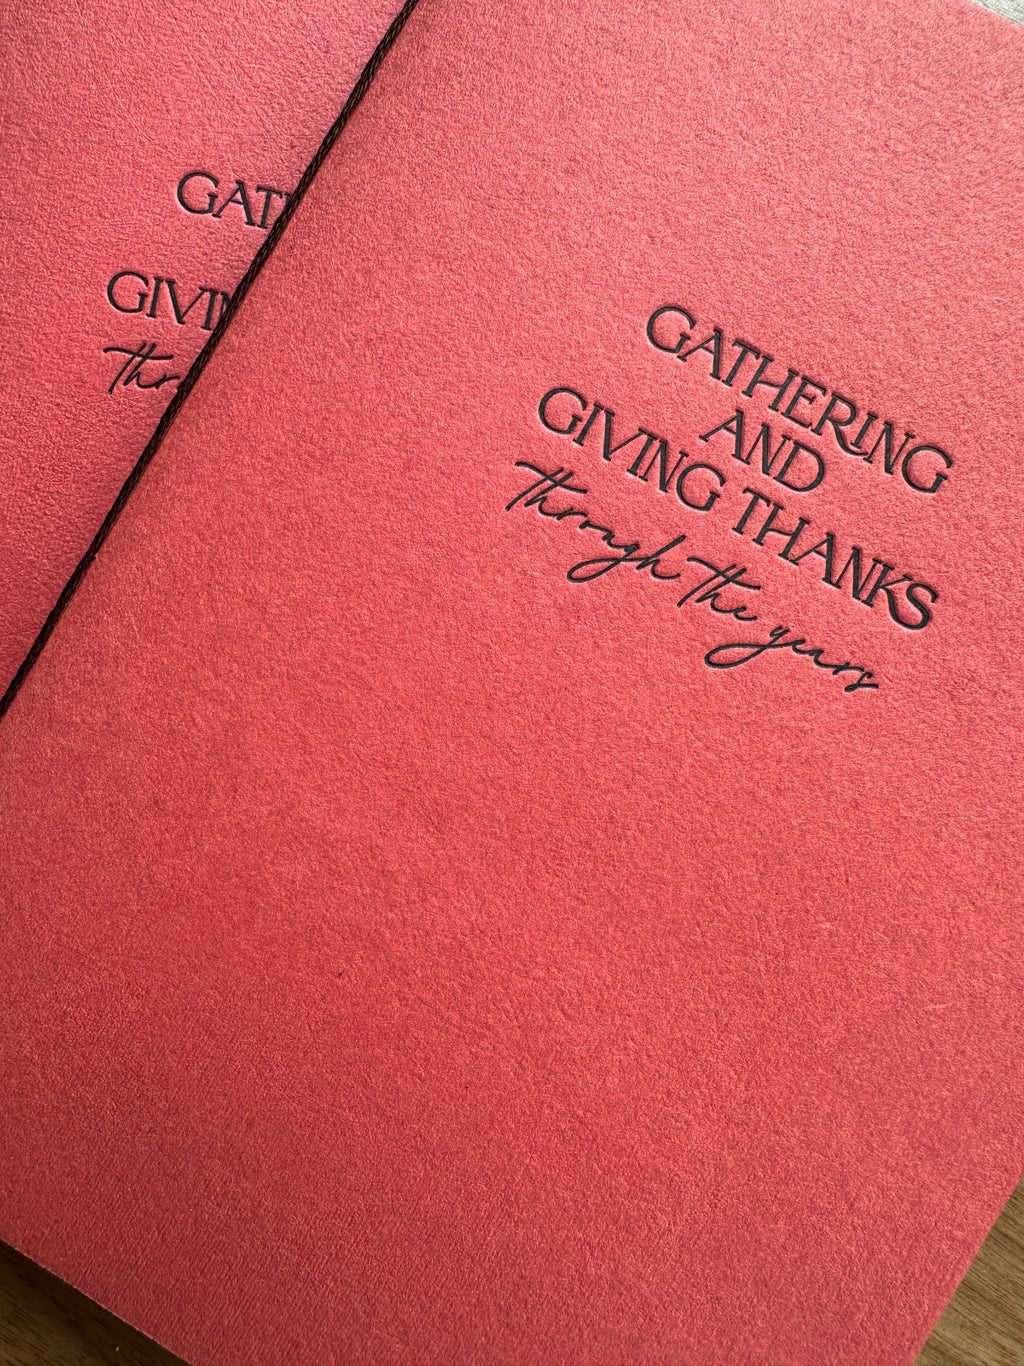 Gather and Give Thanks Memory Book